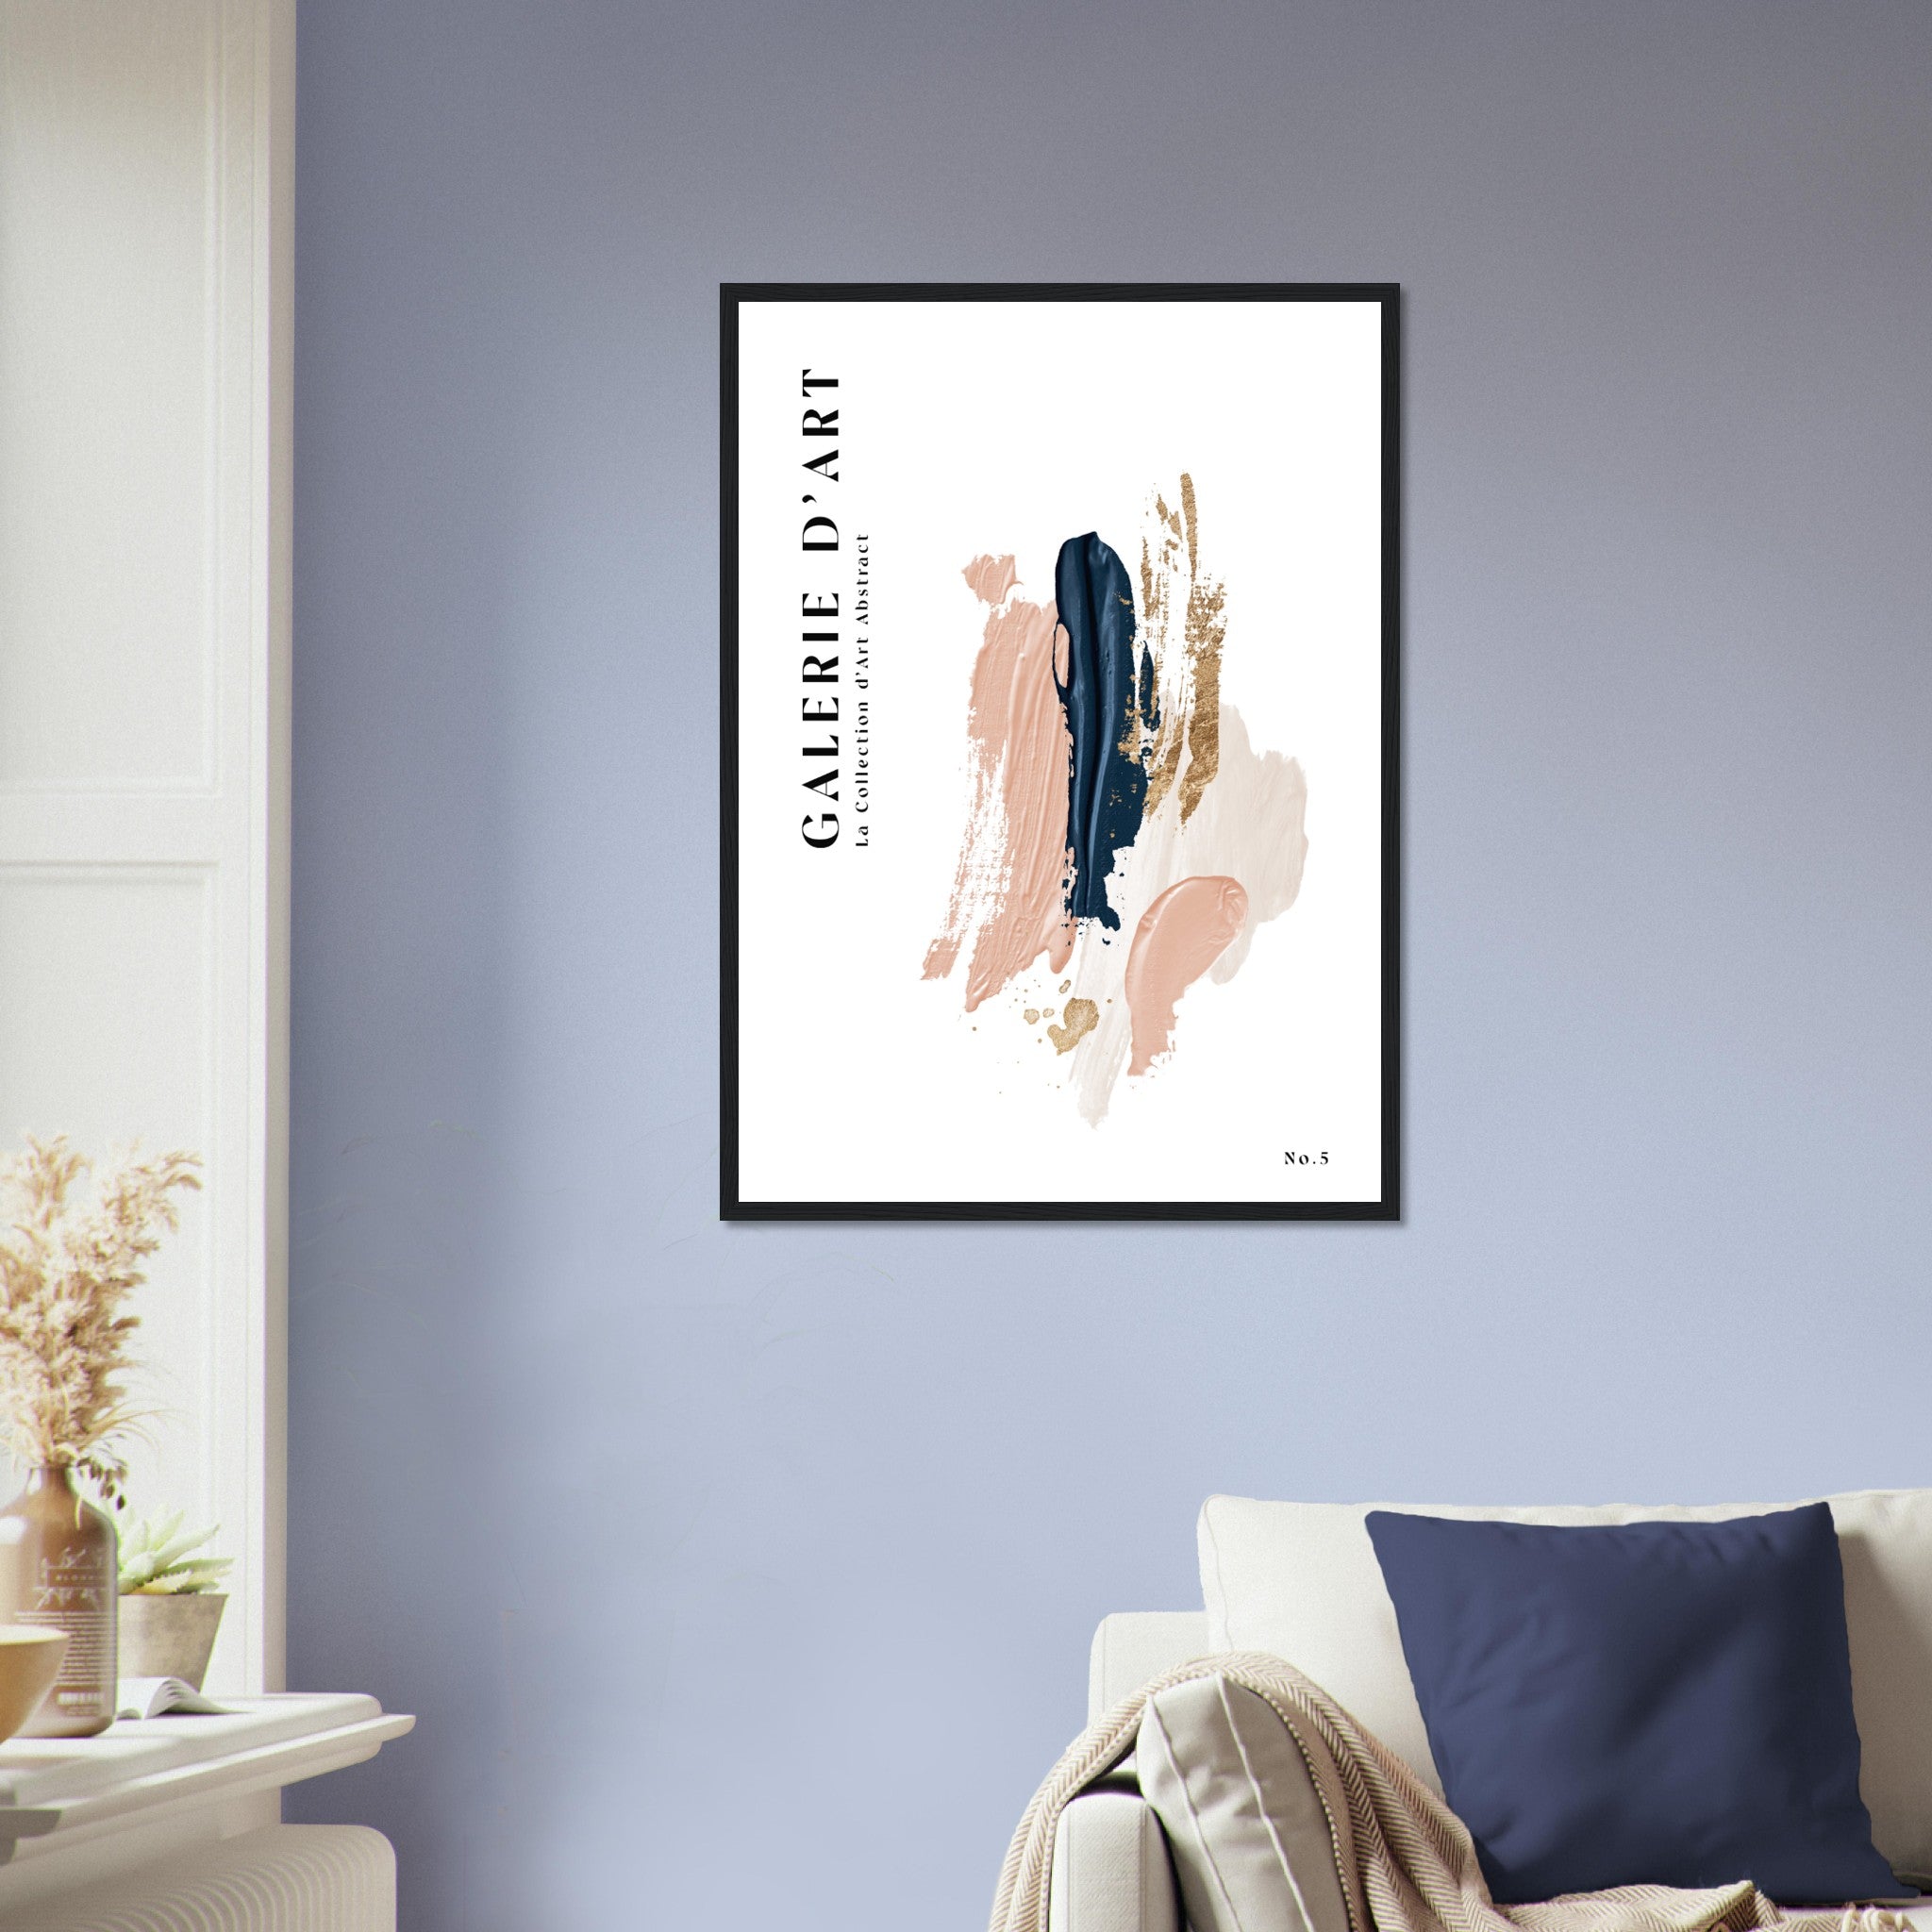 Galerie Art Abstract No. 5 Poster